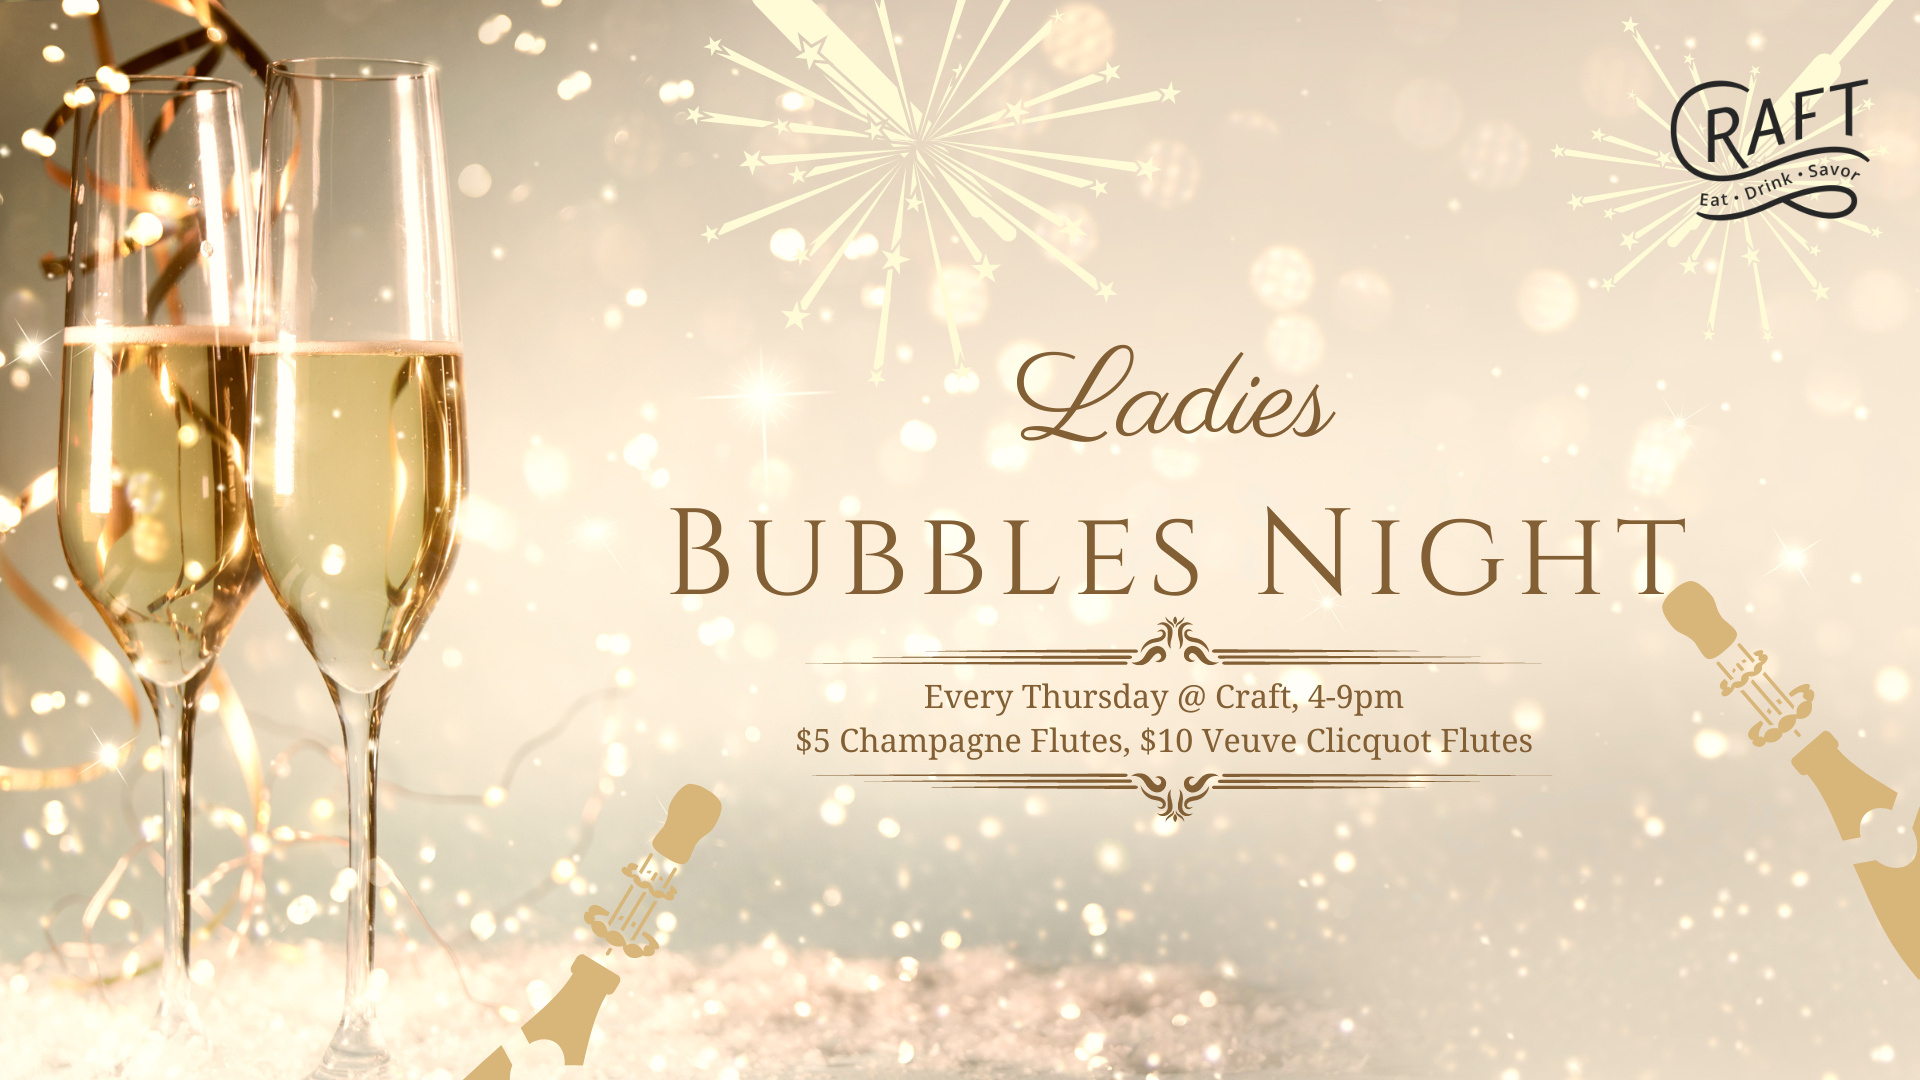 Thursday is Ladies Bubbles Night @ Craft